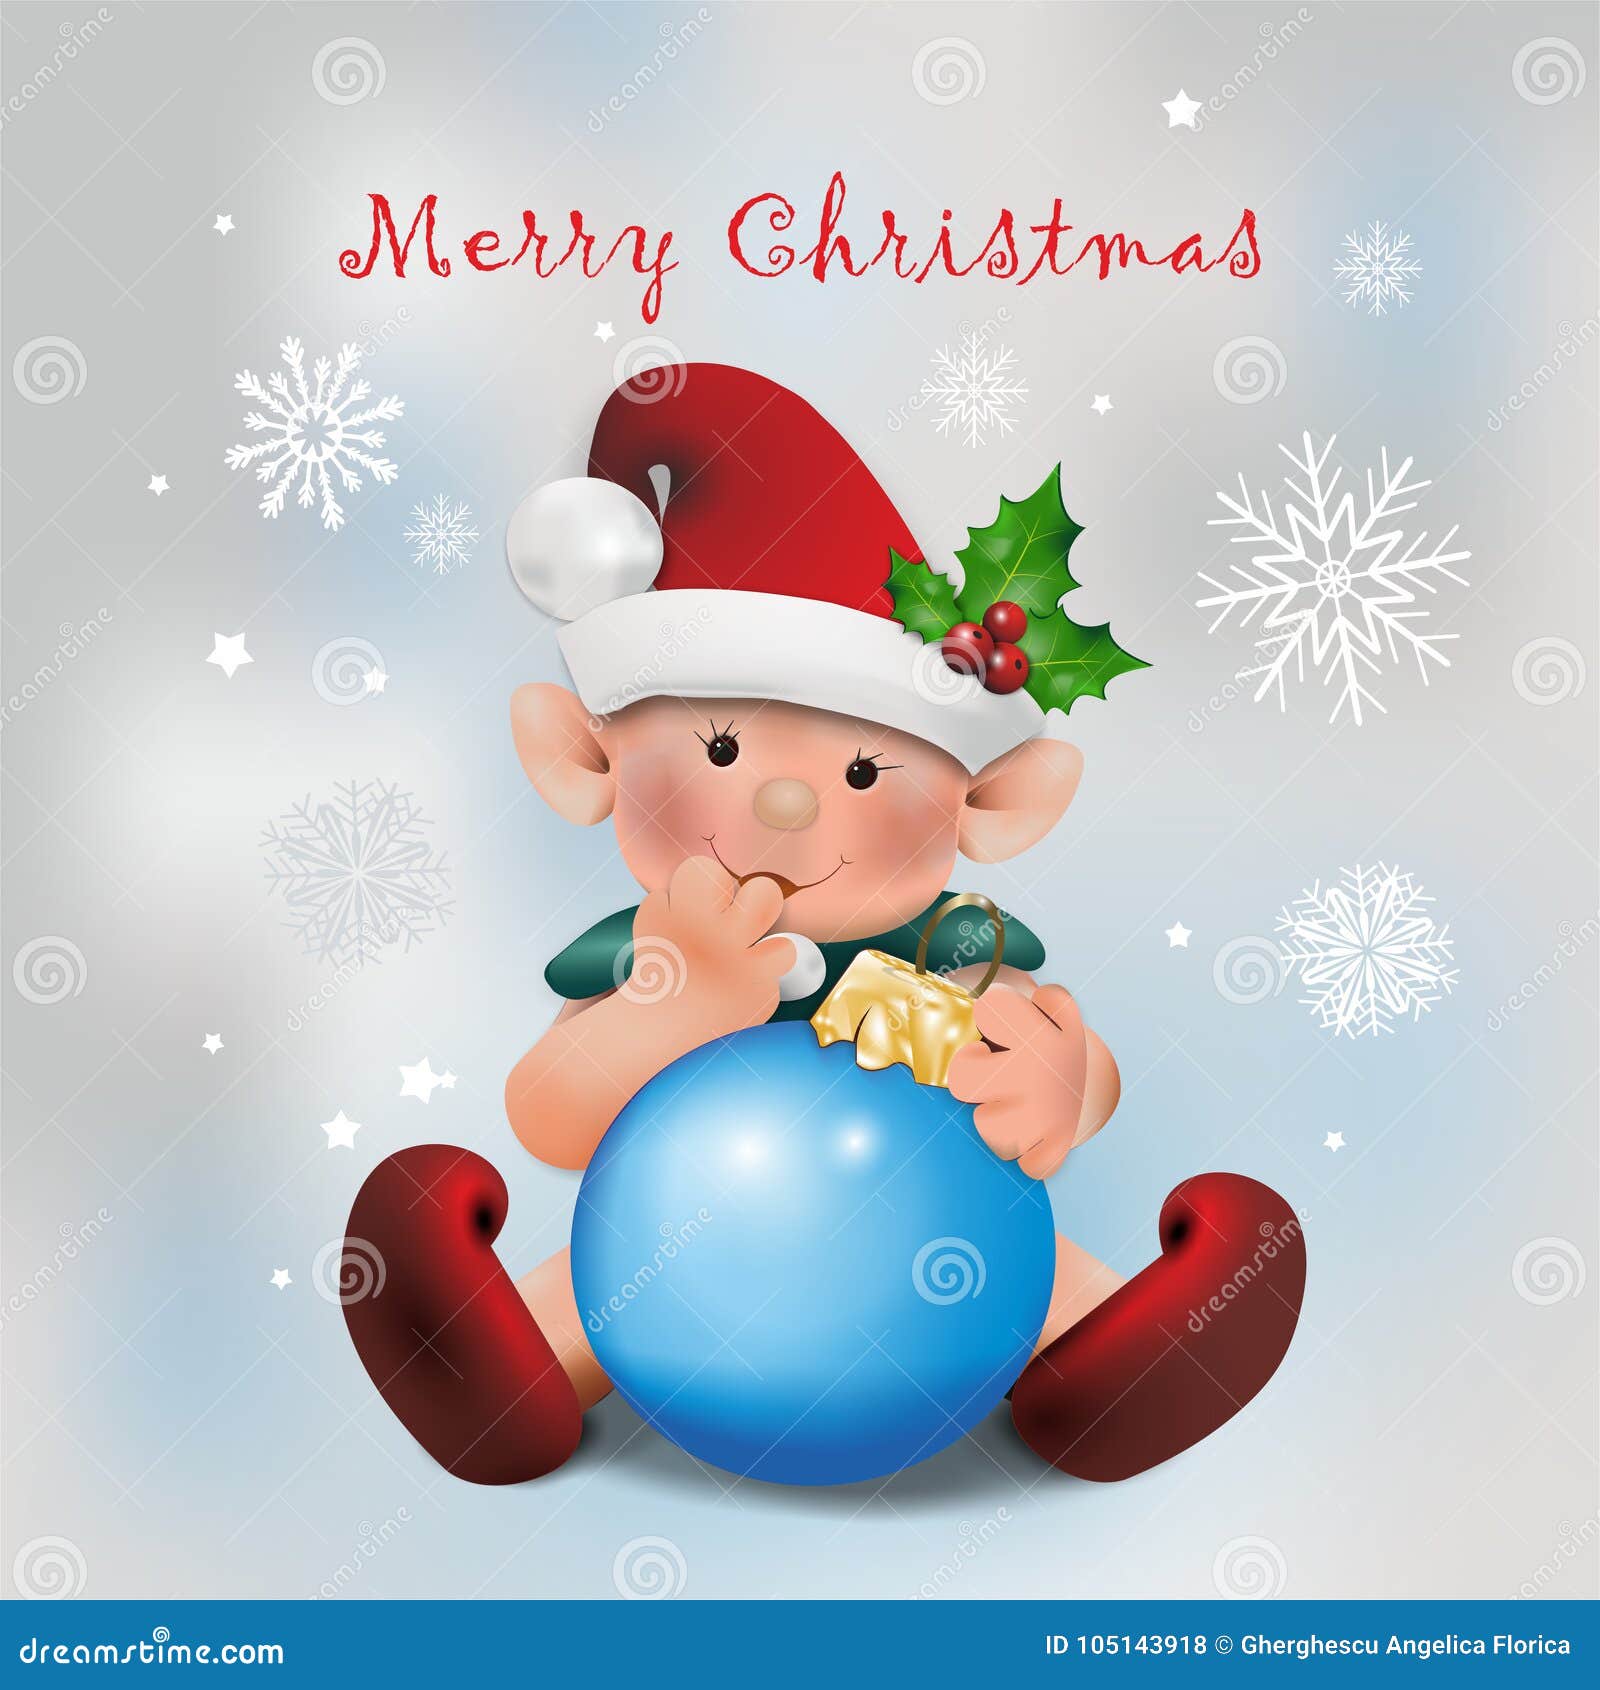 Christmas Card With Baby Elf Stock Illustration Illustration Of Blue Holidays 105143918